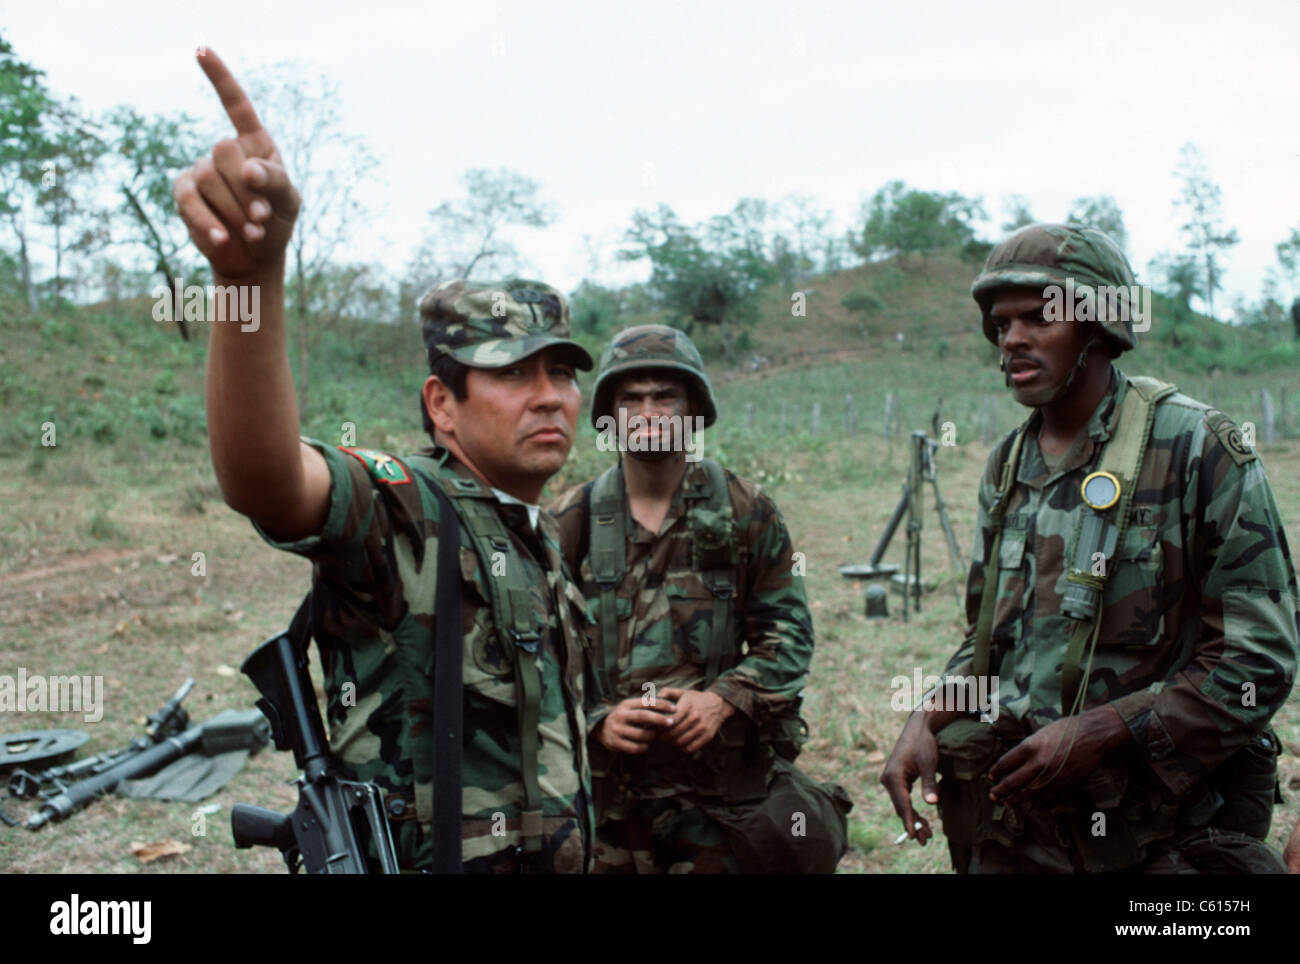 A Honduran Second Lieutenant talks with American soldiers from the 82nd Airborne Division during joint exercises in Judicalpa Honduras. Mar. 1 1988., Photo by:Everett Collection(BSLOC 2011 6 125) Stock Photo